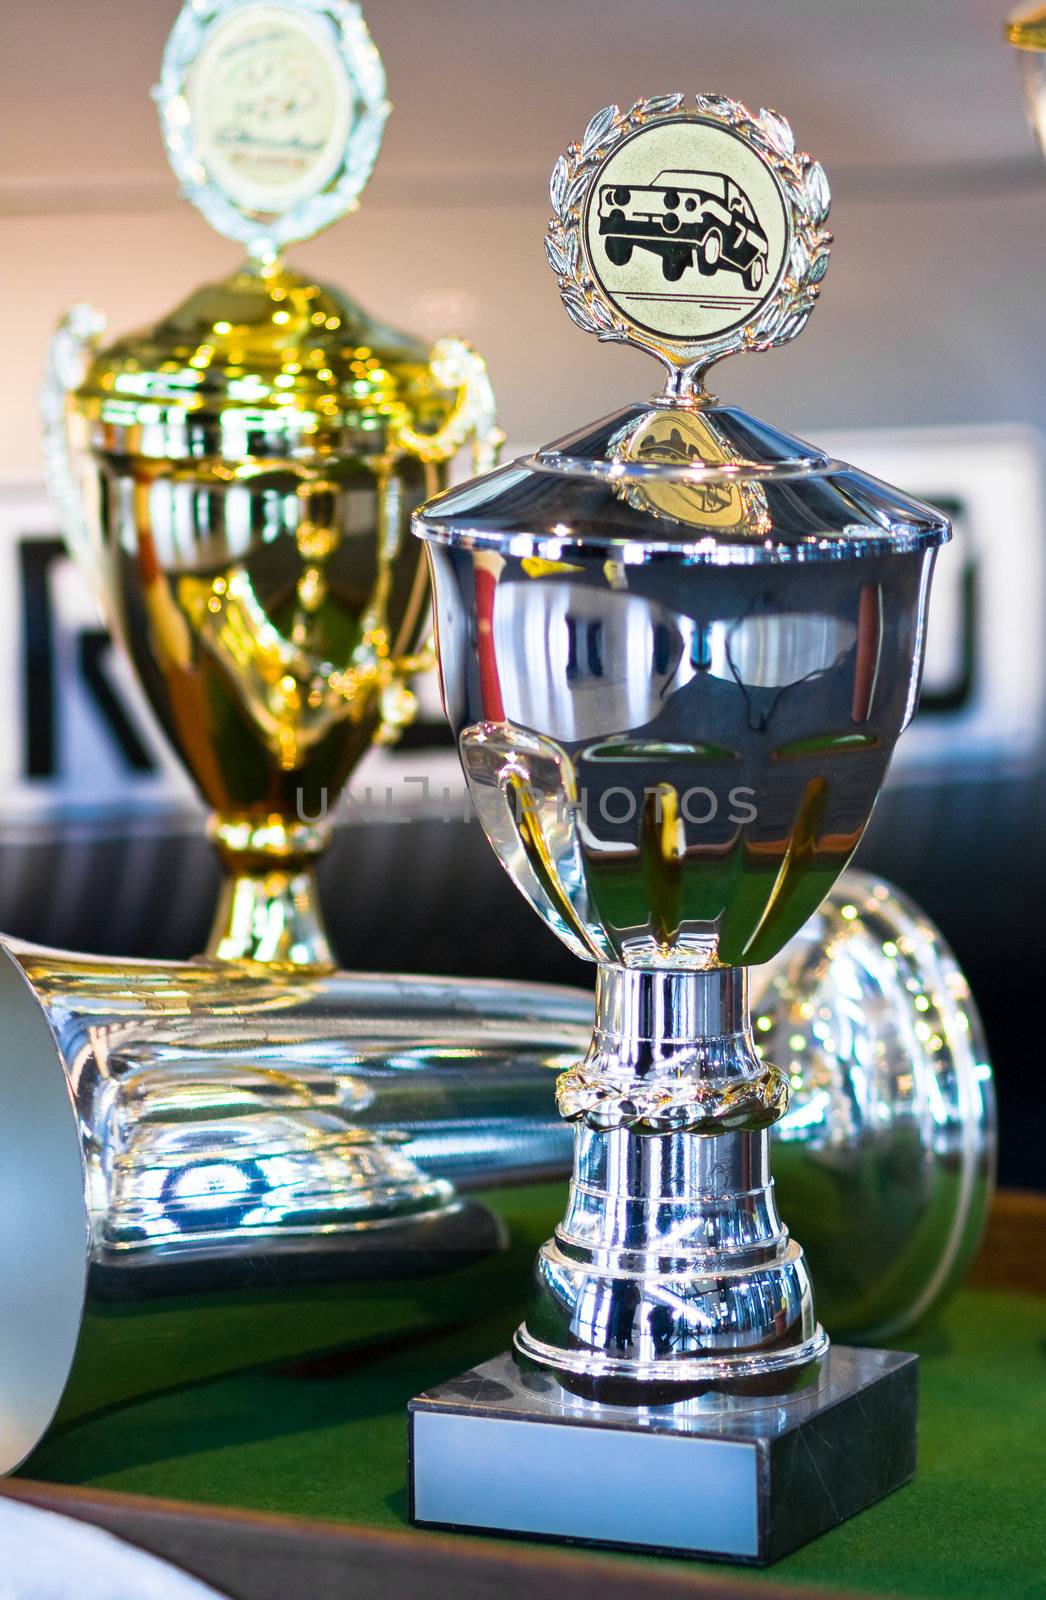 Trophy for car race winning or medal on background with a Automobile